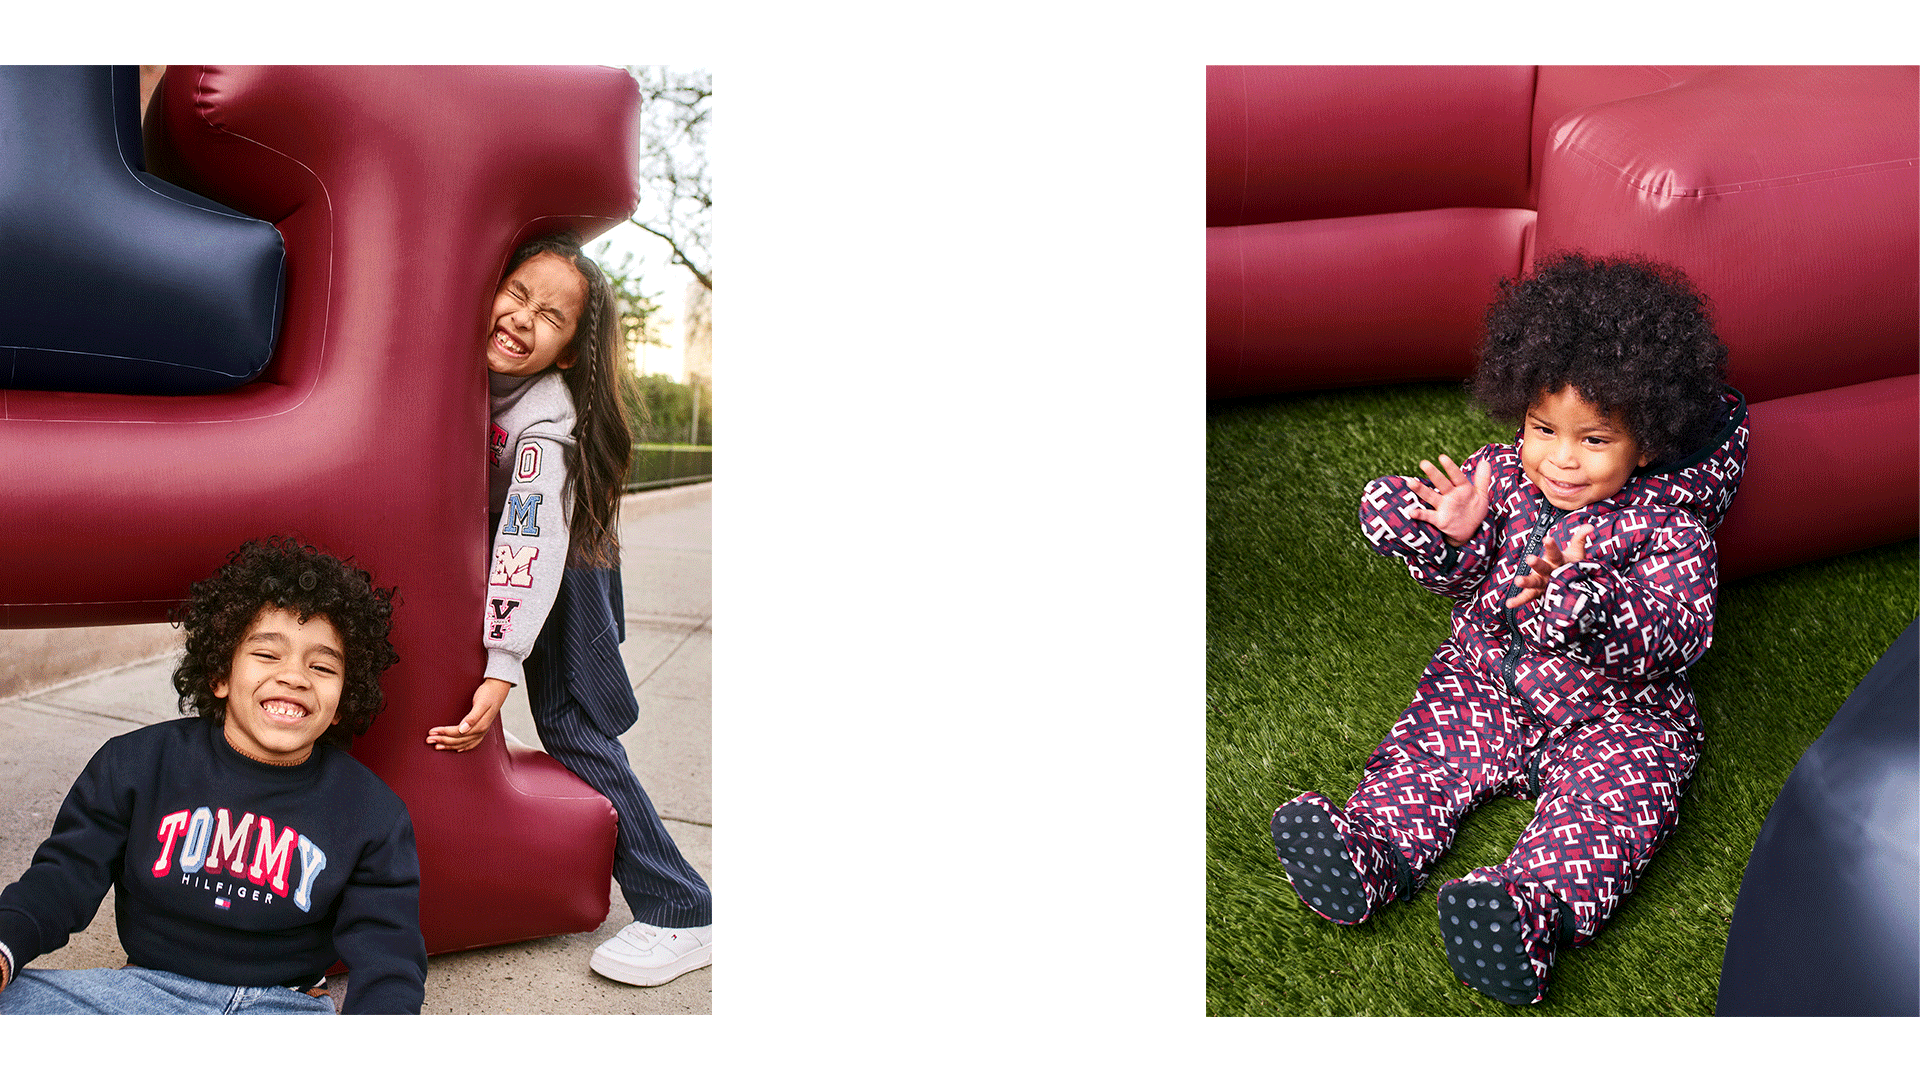 tommy-hilfiger-kids-autumn-collection-back-to-school-fashion-retouching